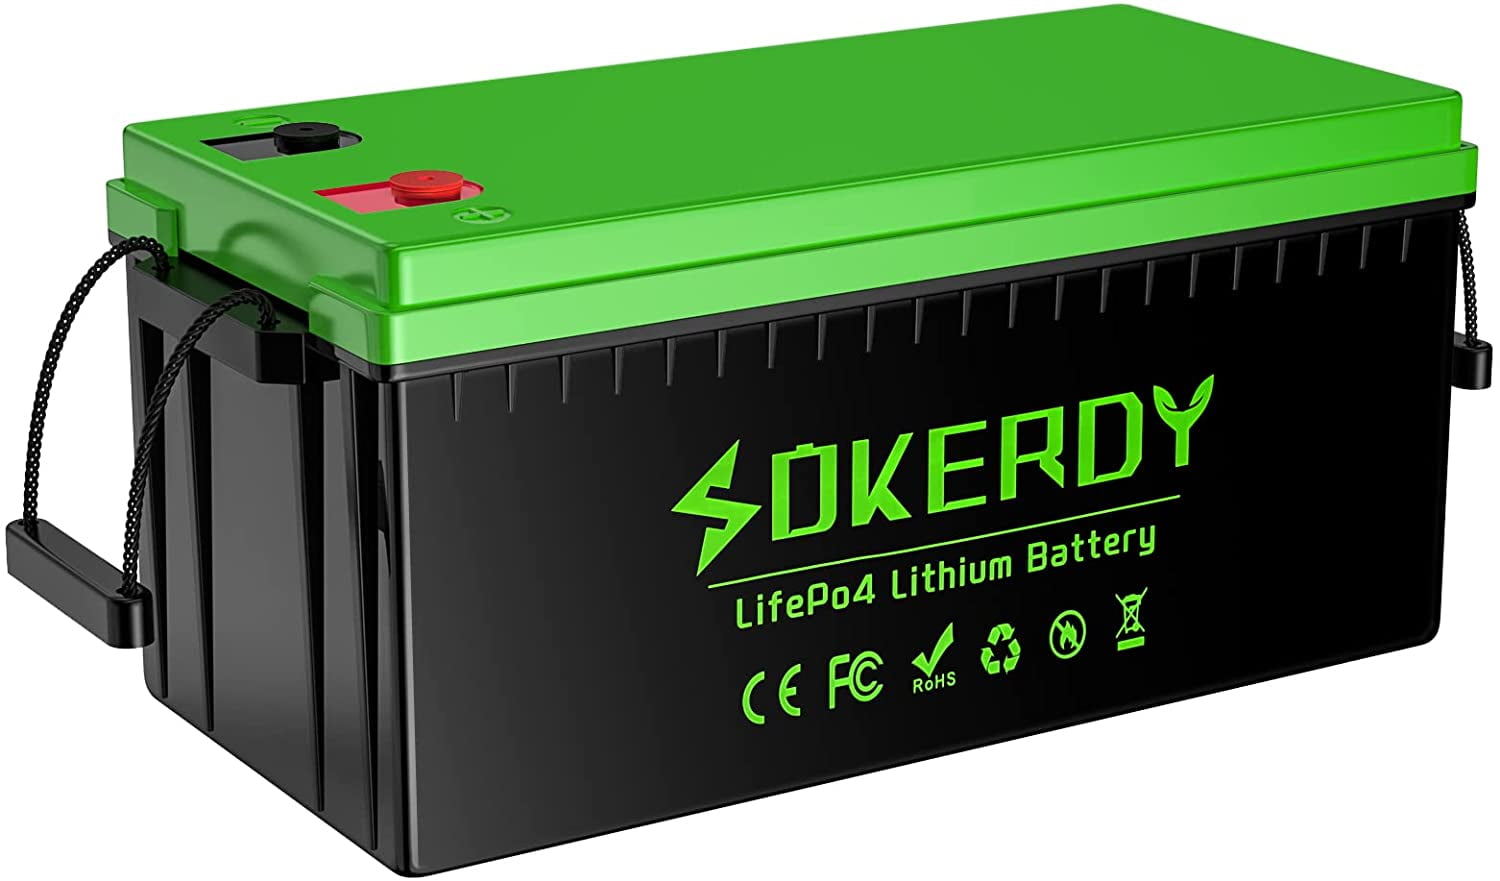 [Only $229.99] Power Queen 12.8V 100Ah LiFePO4 Battery, Built-in 100A BMS,  Match BCI Group 31 Battery Box